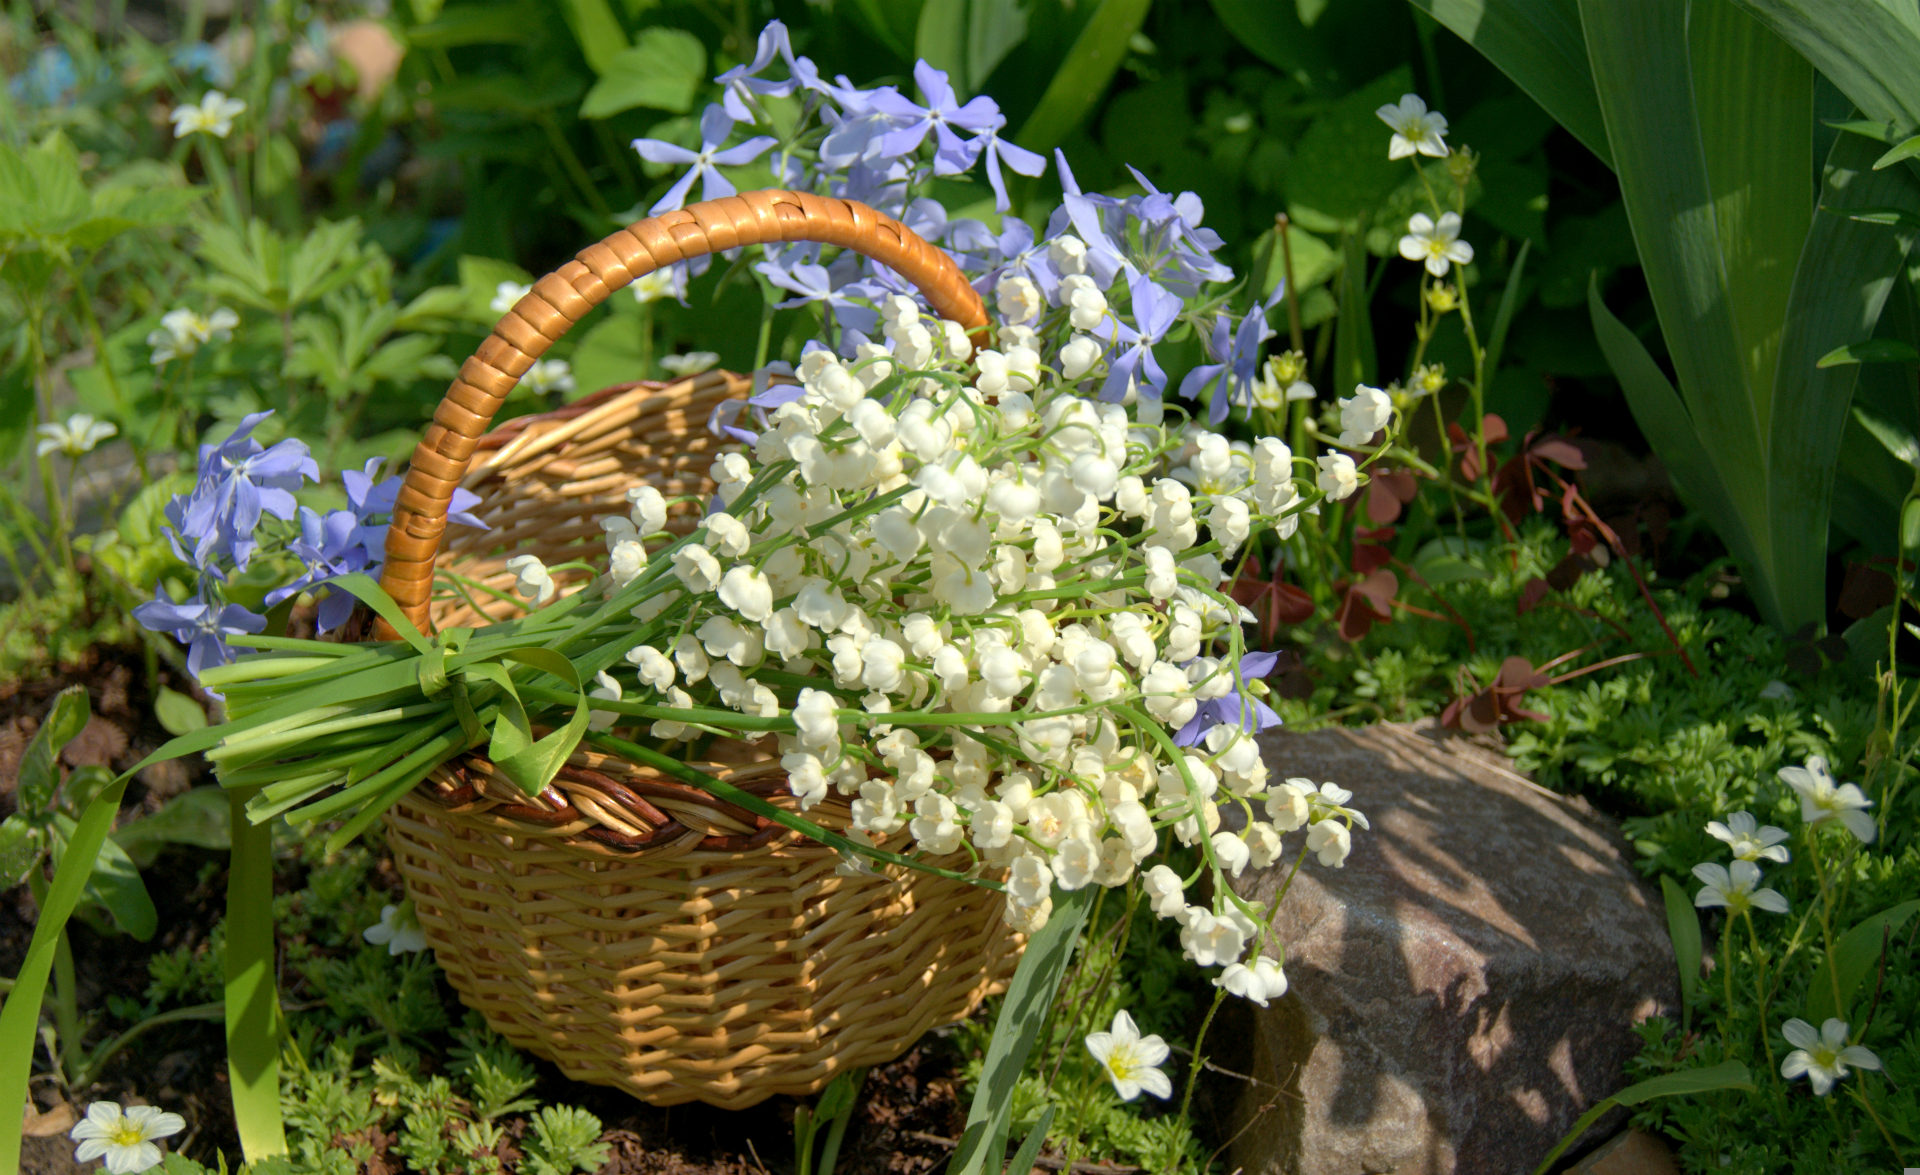 lily of the valley, basket, earth, flower, white flower, flowers